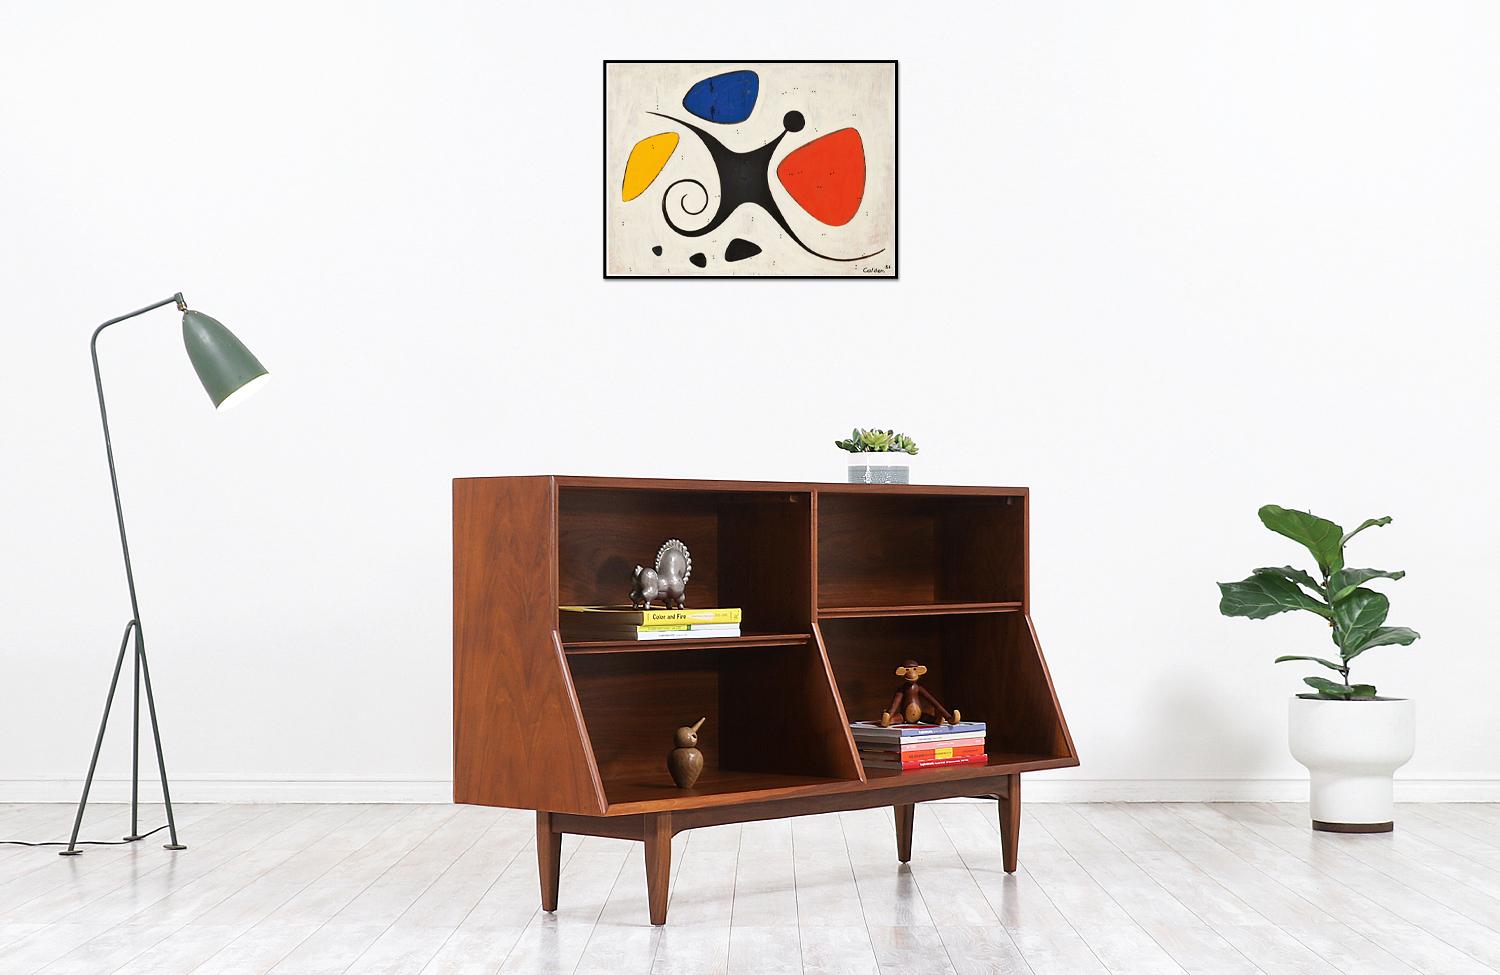 A must-have and Classic bookshelf designed by the famous American duo Kipp Stewart & Stewart MacDougall in collaboration with Drexel of North Carolina circa 1950s. This skillfully crafted walnut bookshelf features a versatile shelved interior with